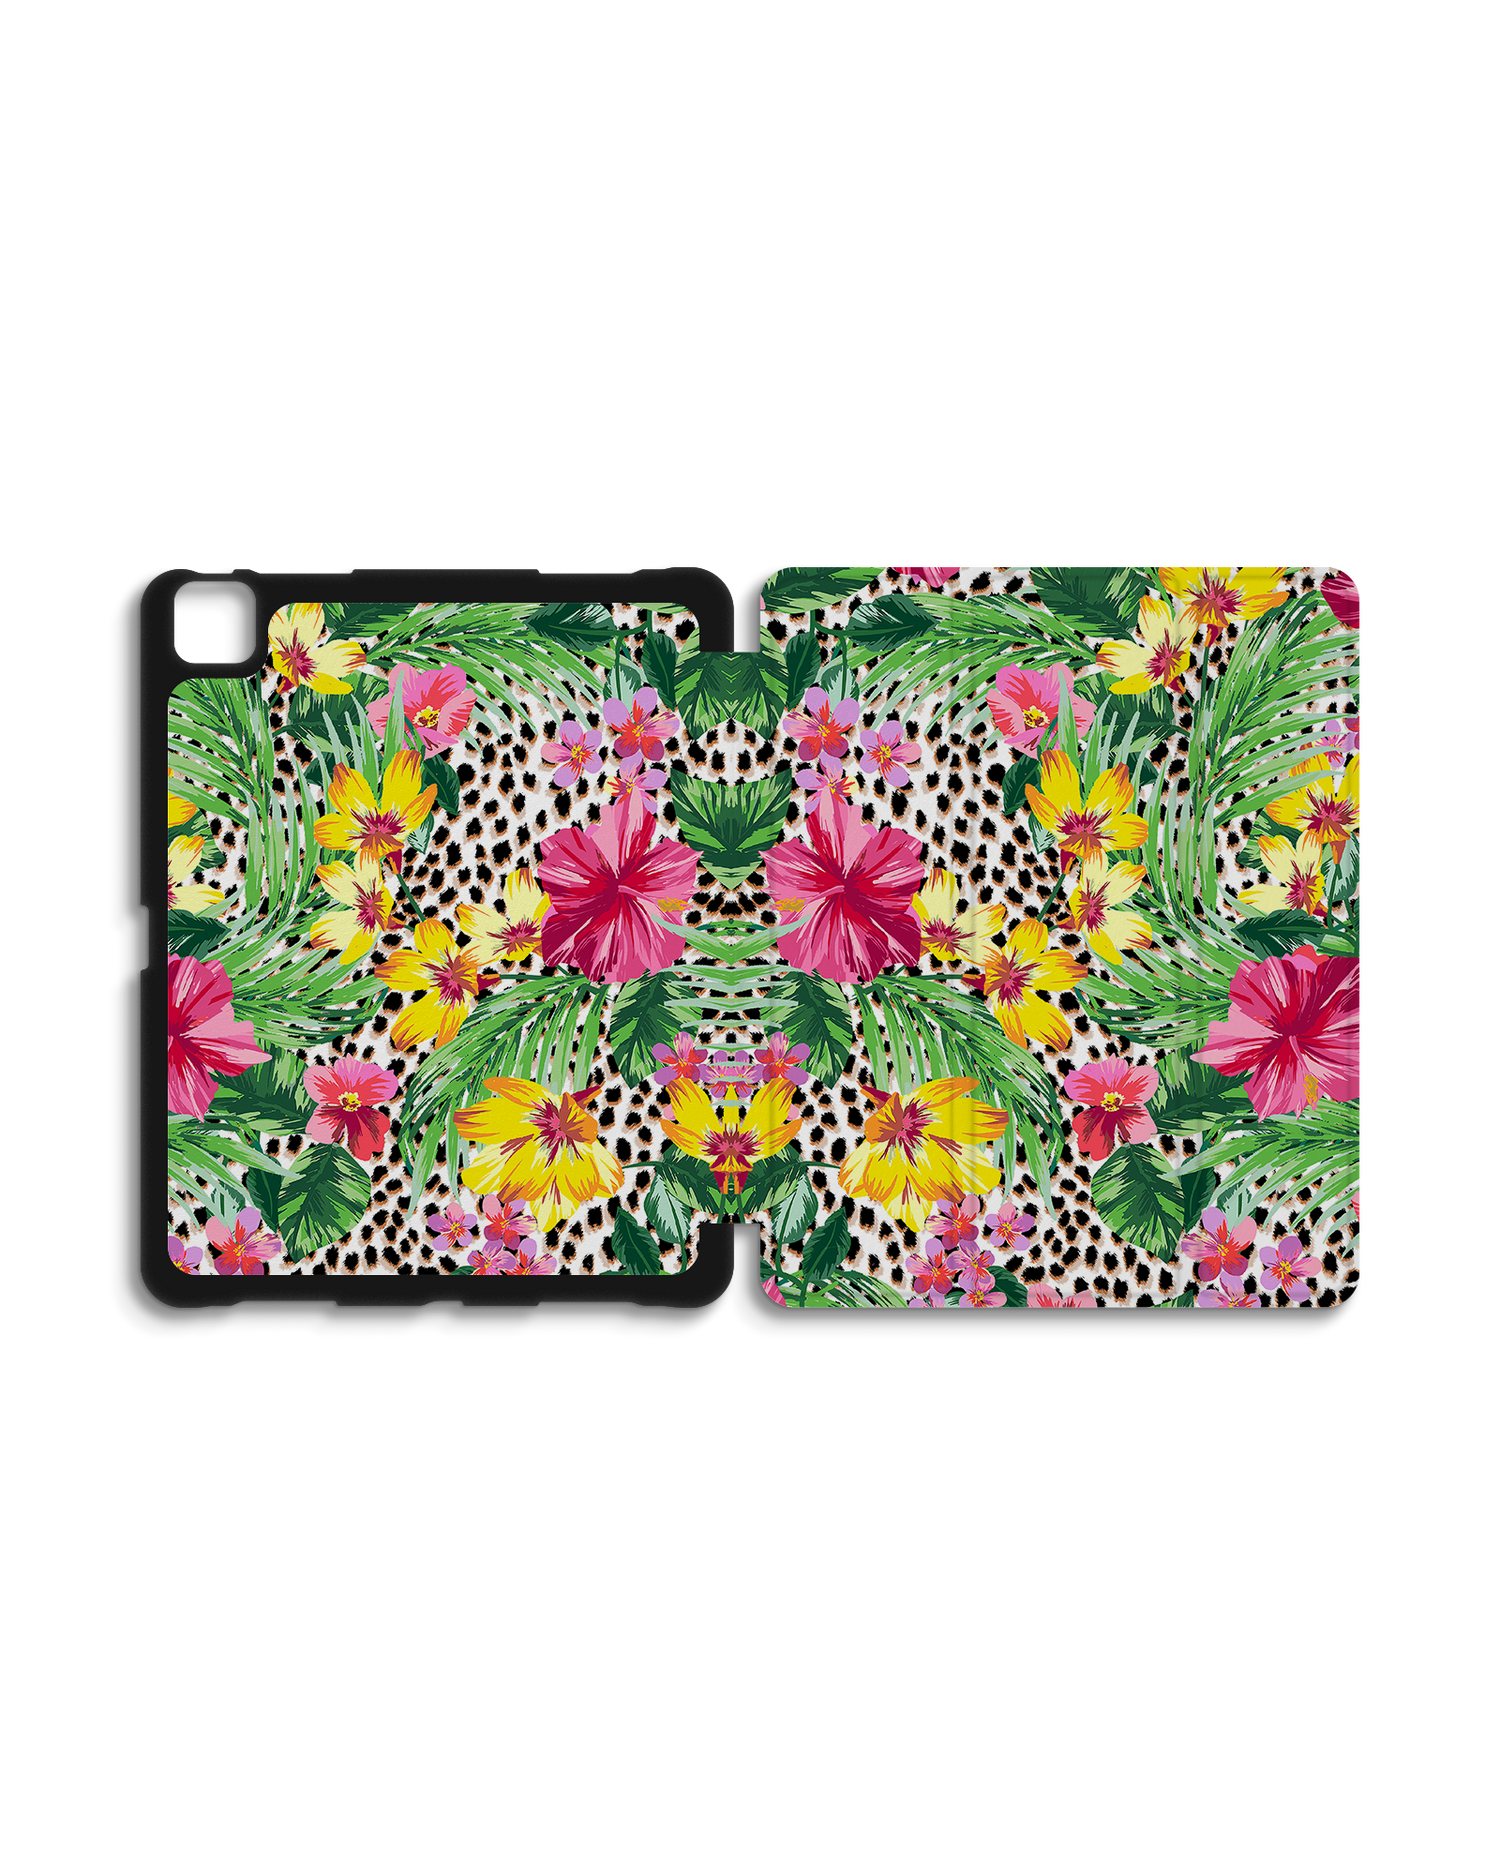 Tropical Cheetah iPad Case with Pencil Holder for Apple iPad Pro 6 12.9